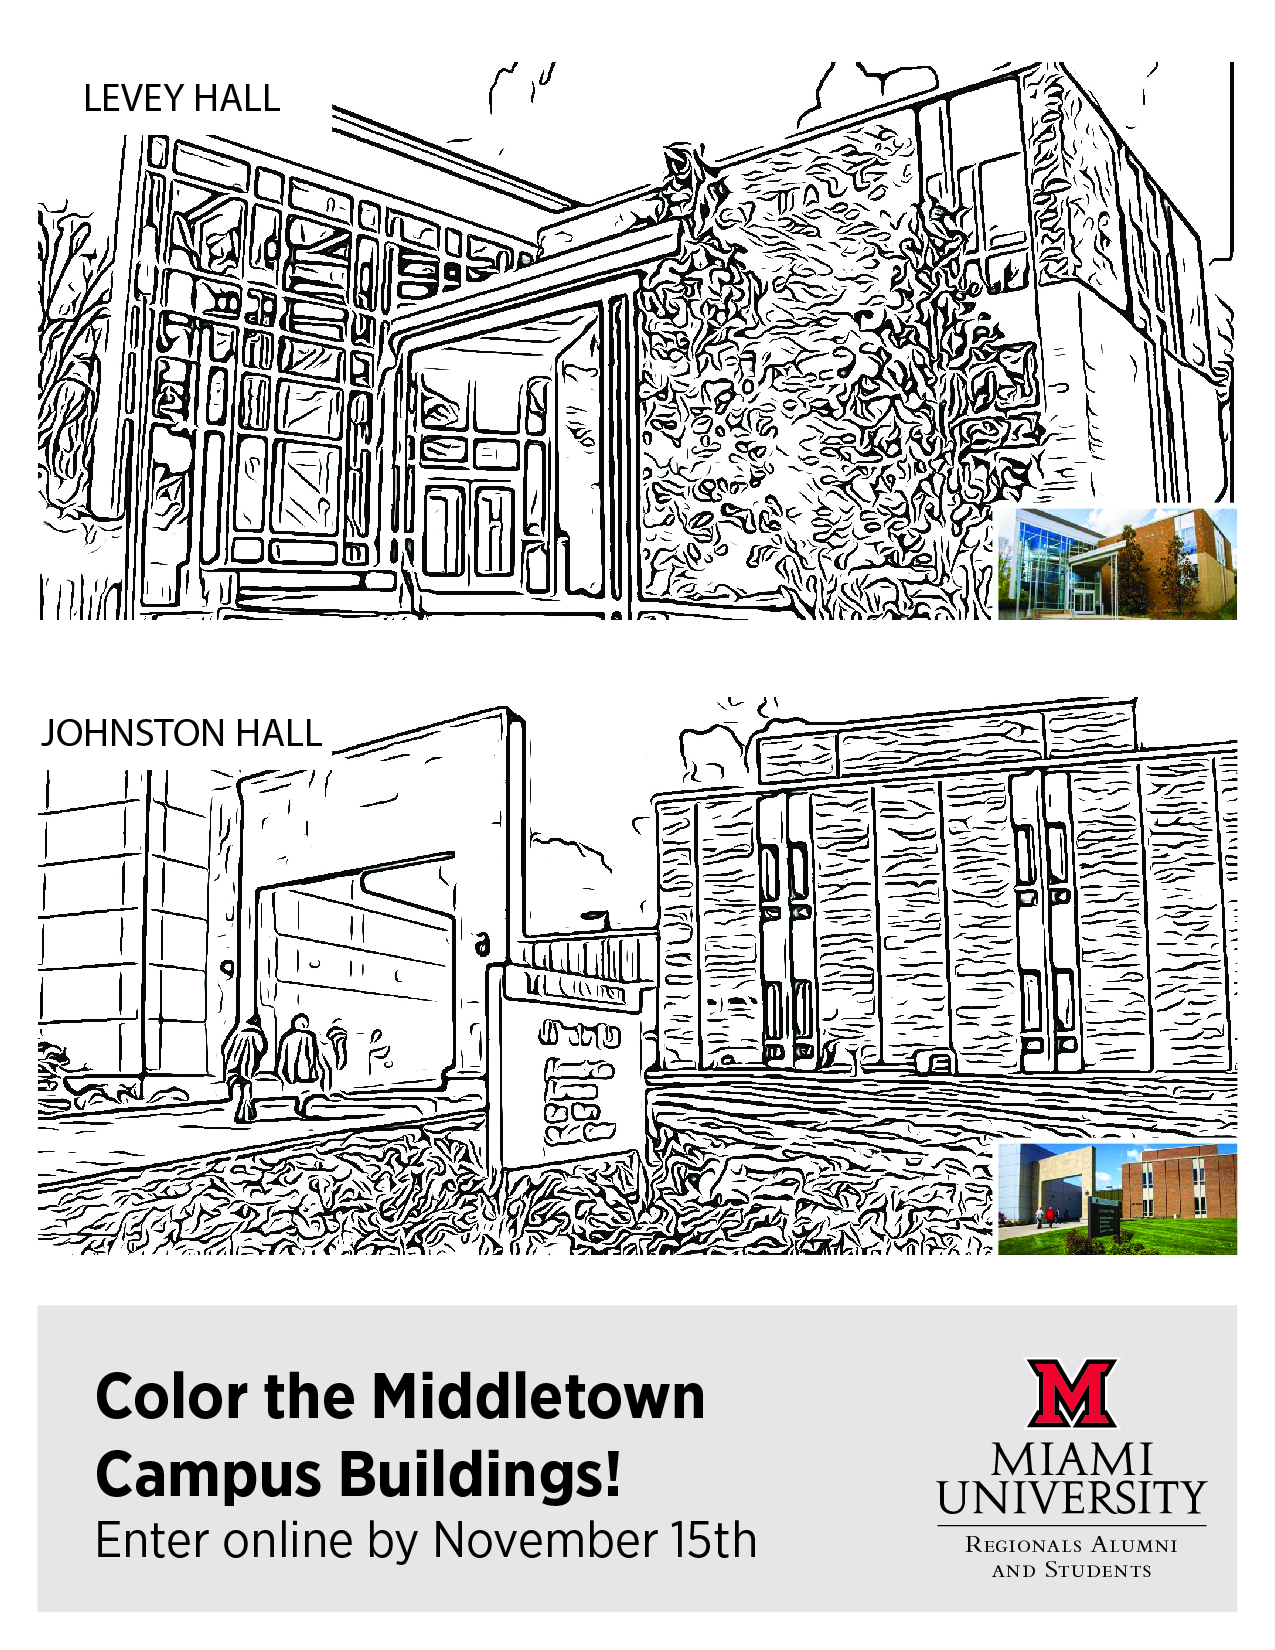 Middletown Campus buildings of Levey Hall and Johnston Hall.